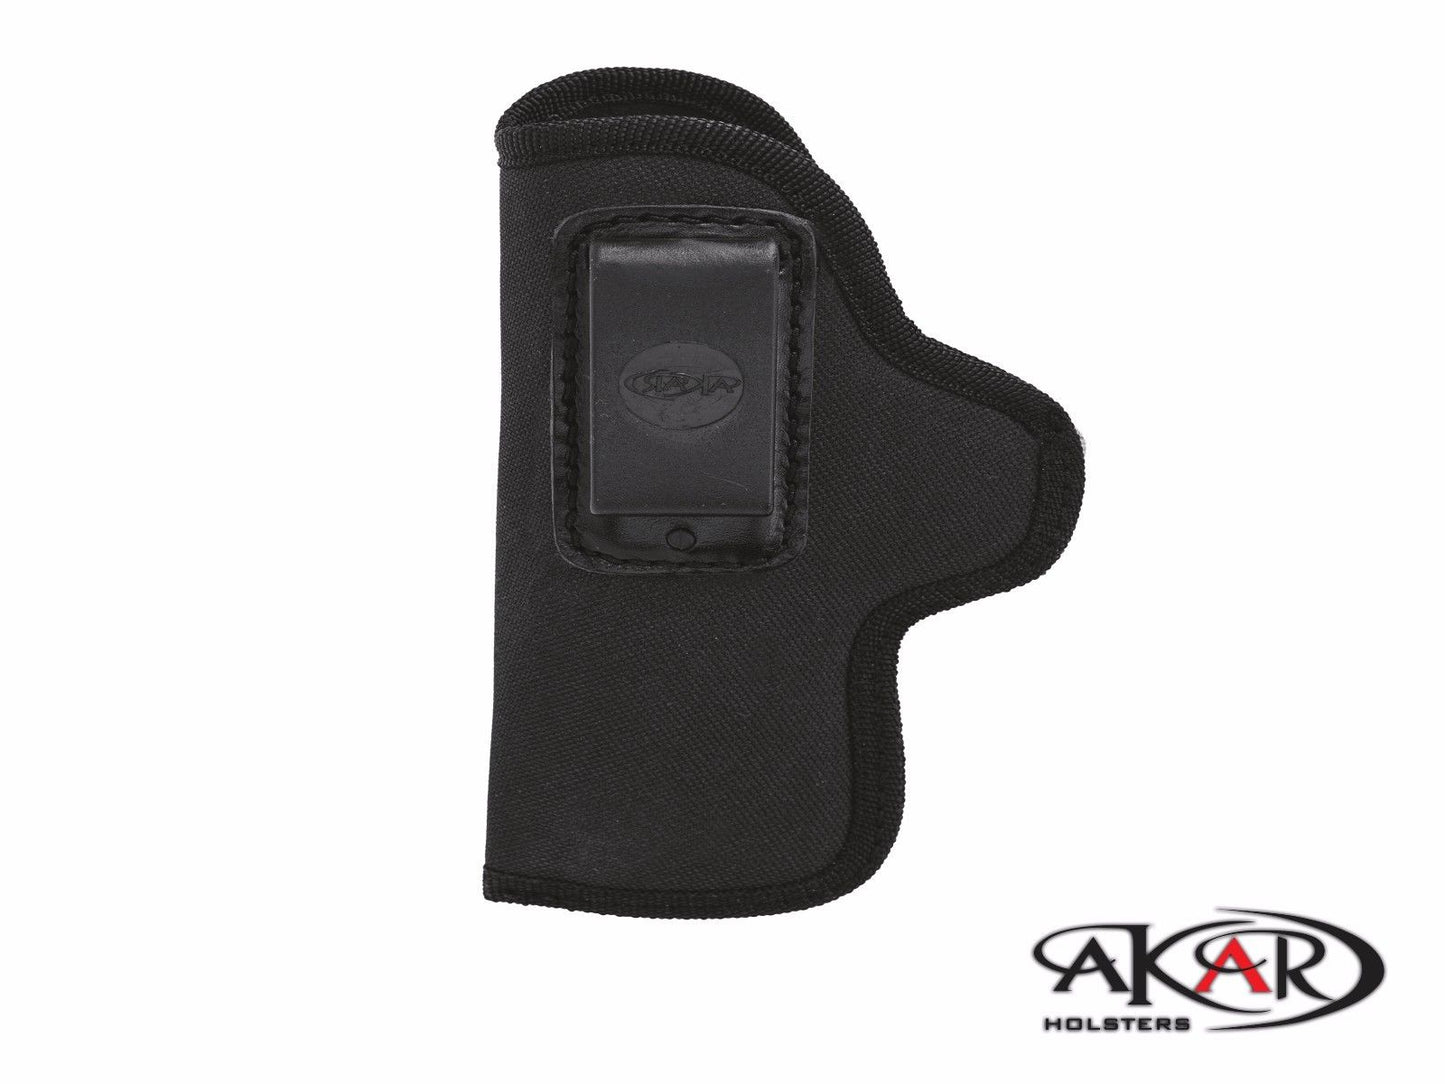 S&W SHIELD 9mm Concealed Carry Nylon IWB-Inside The Waistband Clip Pistol-Option